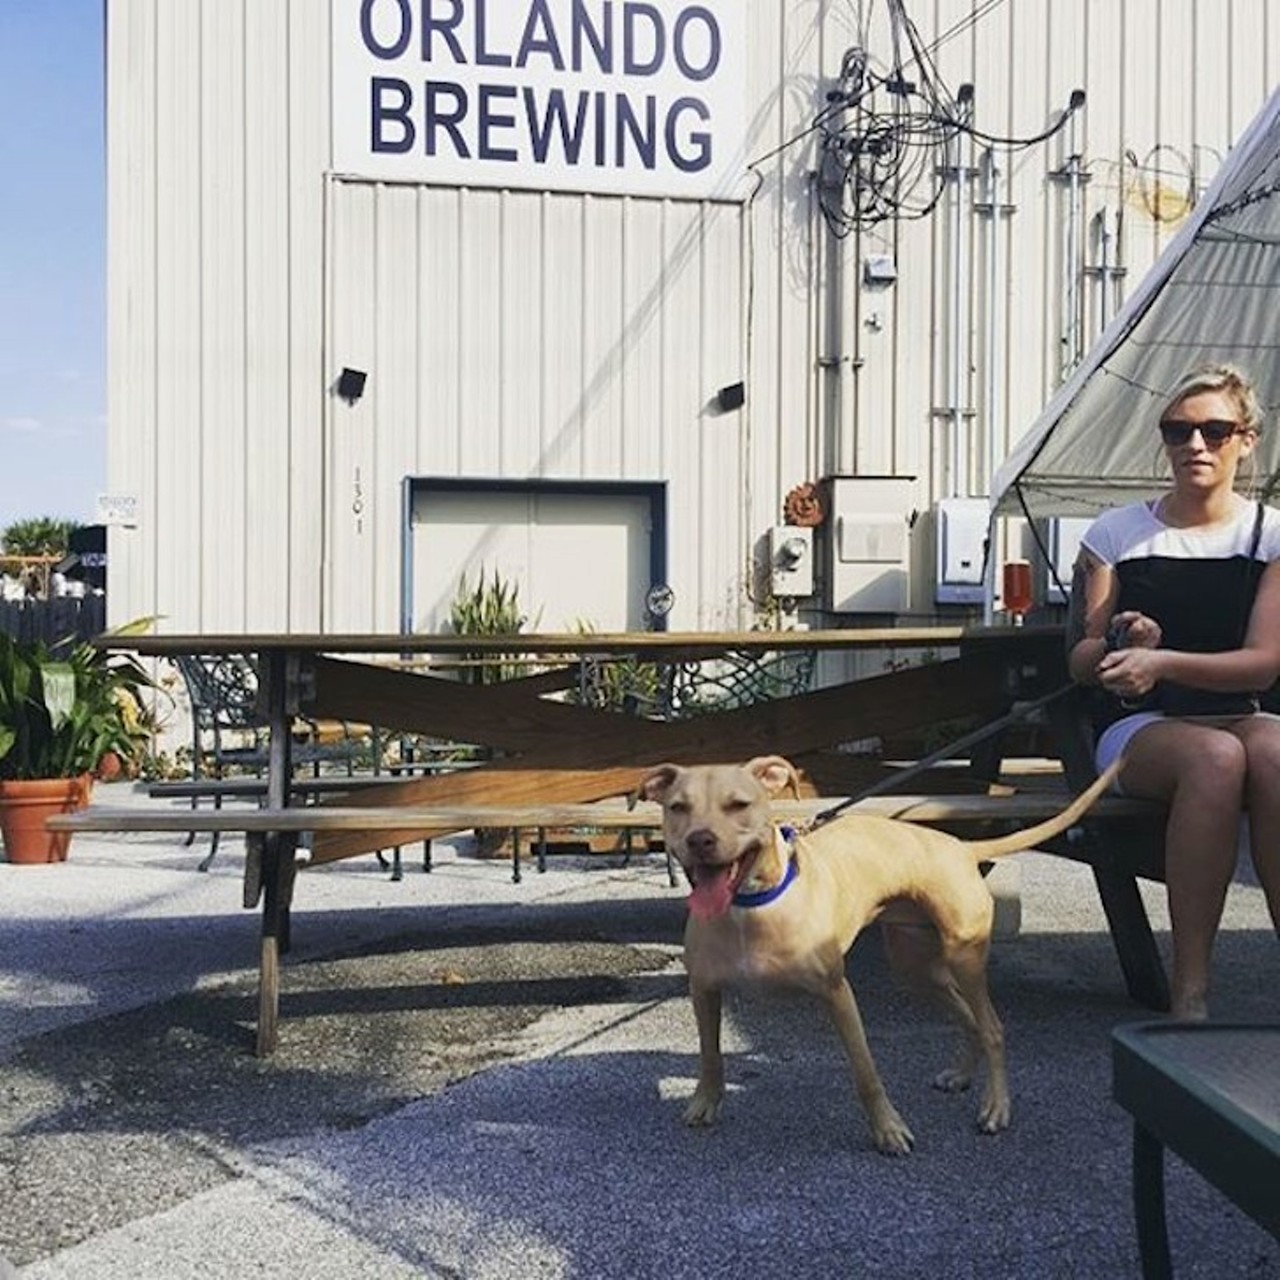 Orlando Brewing
1301 Atlanta Ave.| 407-872-1117
If you&#146;re a fan of organic options, grab a few fresh snacks for your pup and head on over to Orlando Brewing, where you&#146;ll find freshly brewed, organic craft beers. 
Photo via davefav12/Instagram